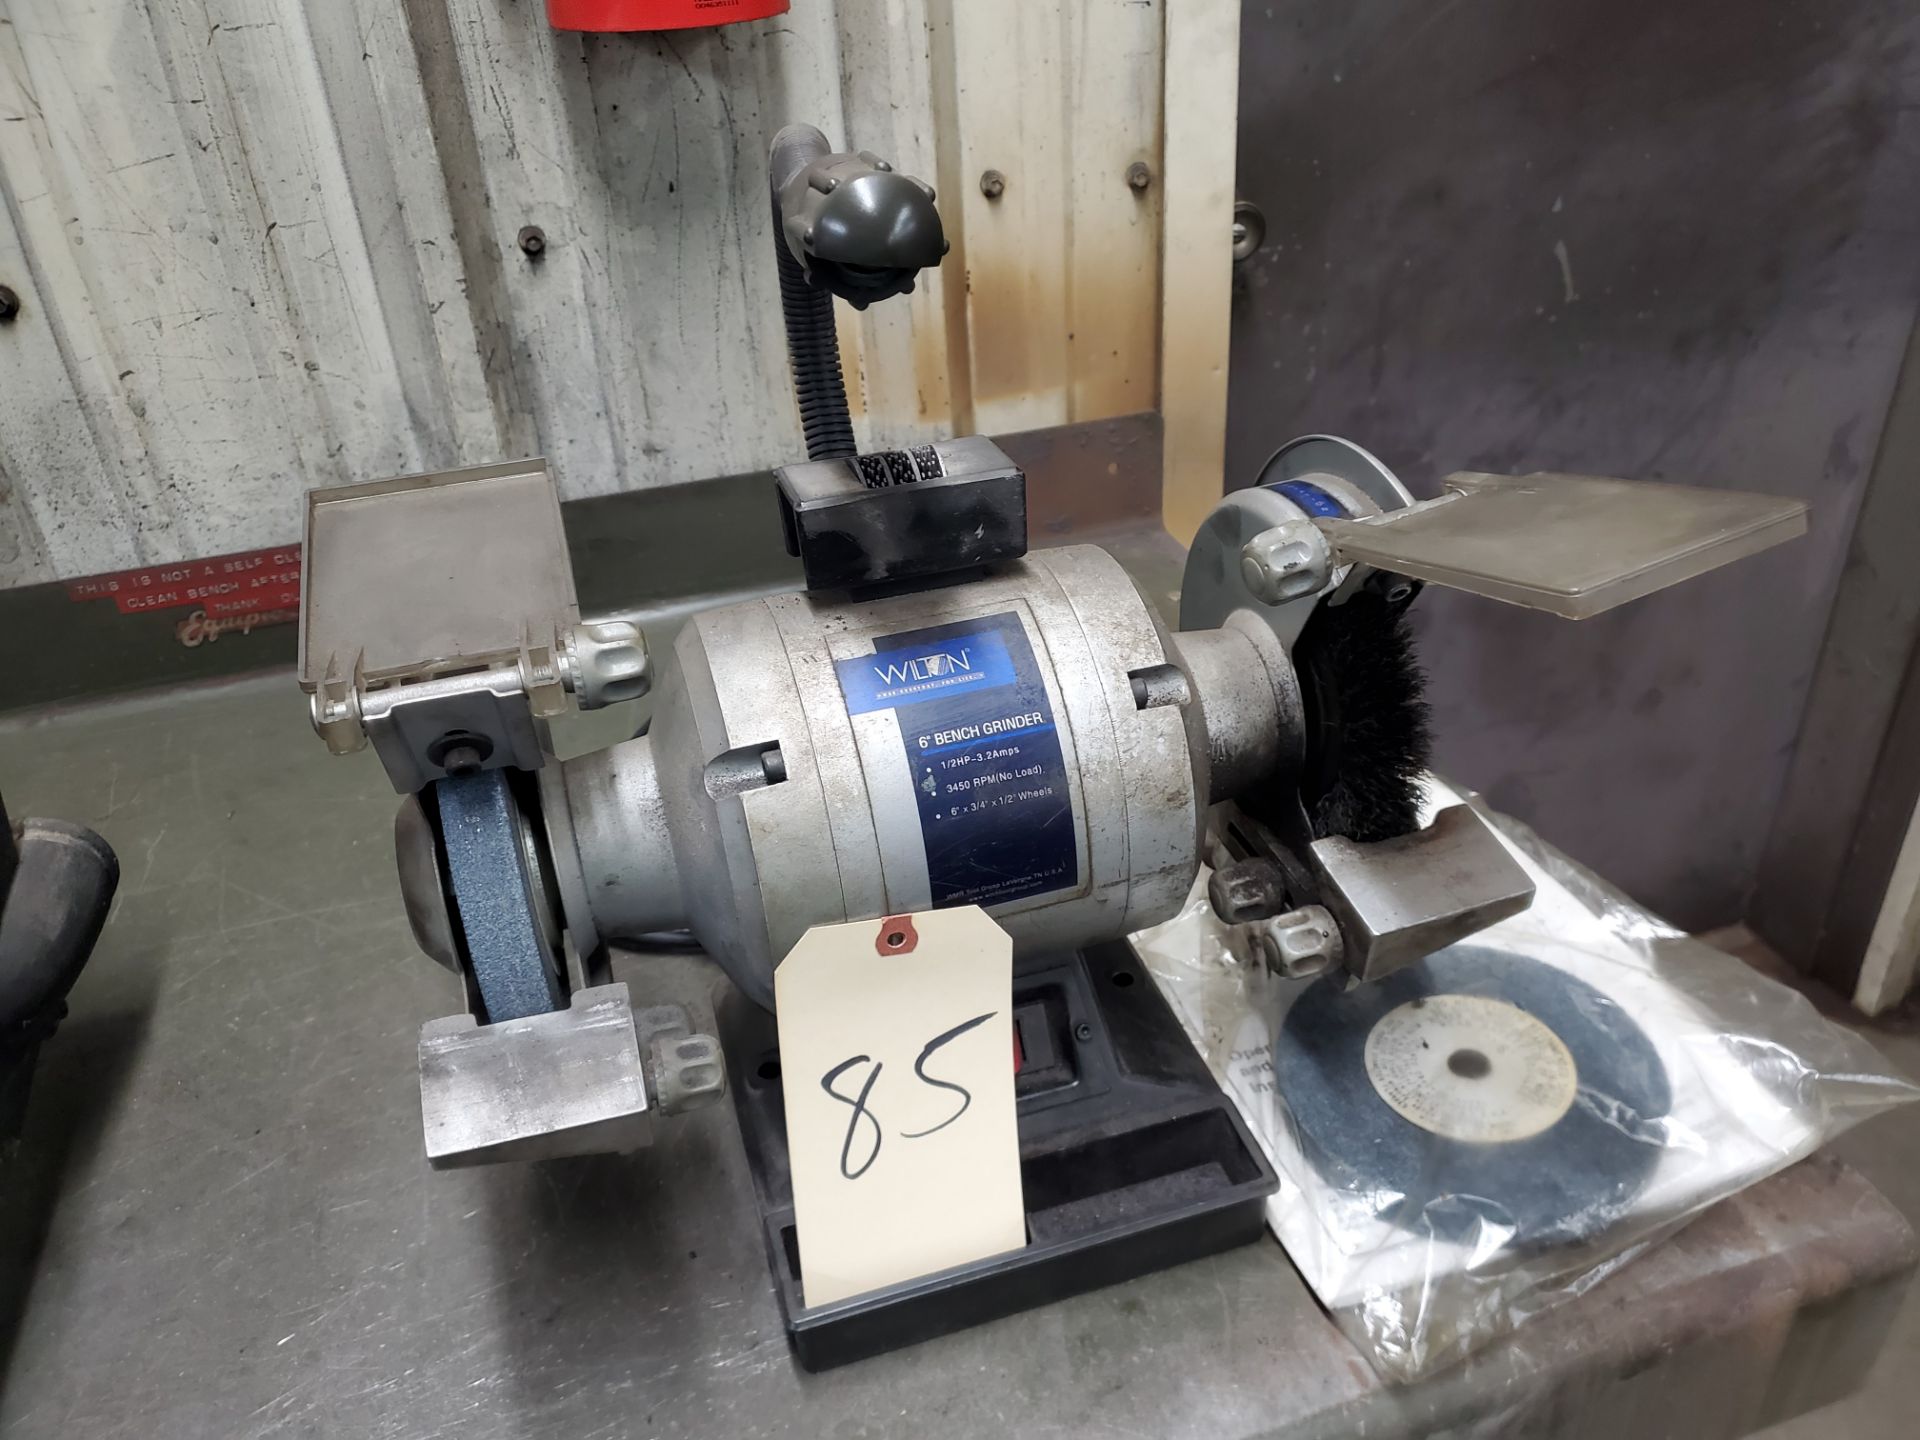 6" Wilton Double End Bench Grinder